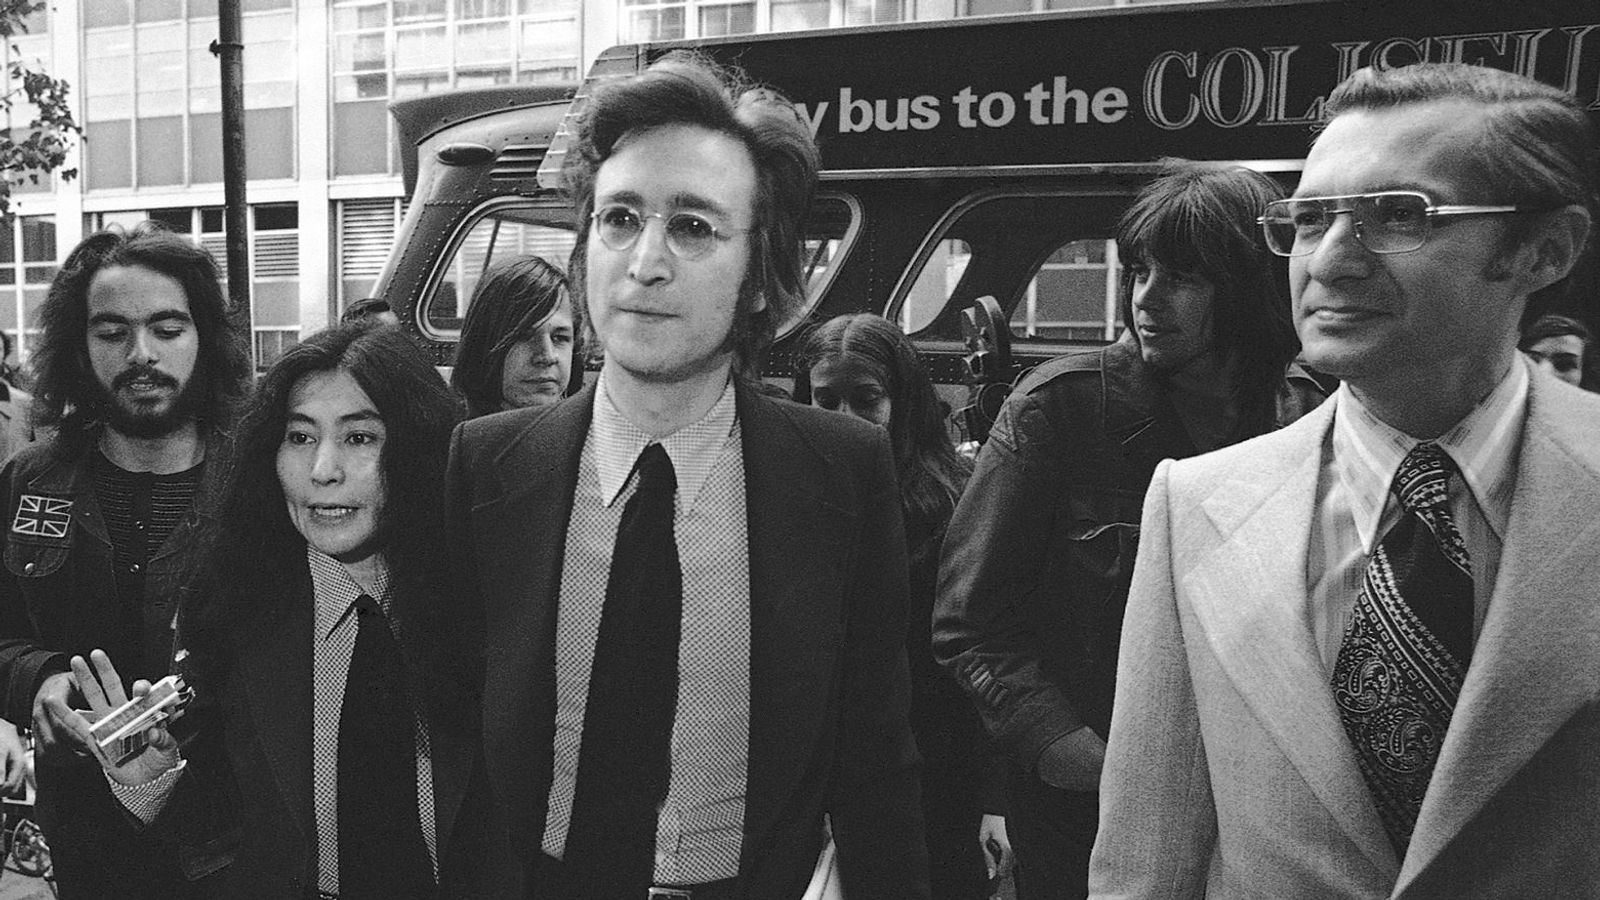 lawyer who became hero among beatles fans for fighting john lennon's deportation has died